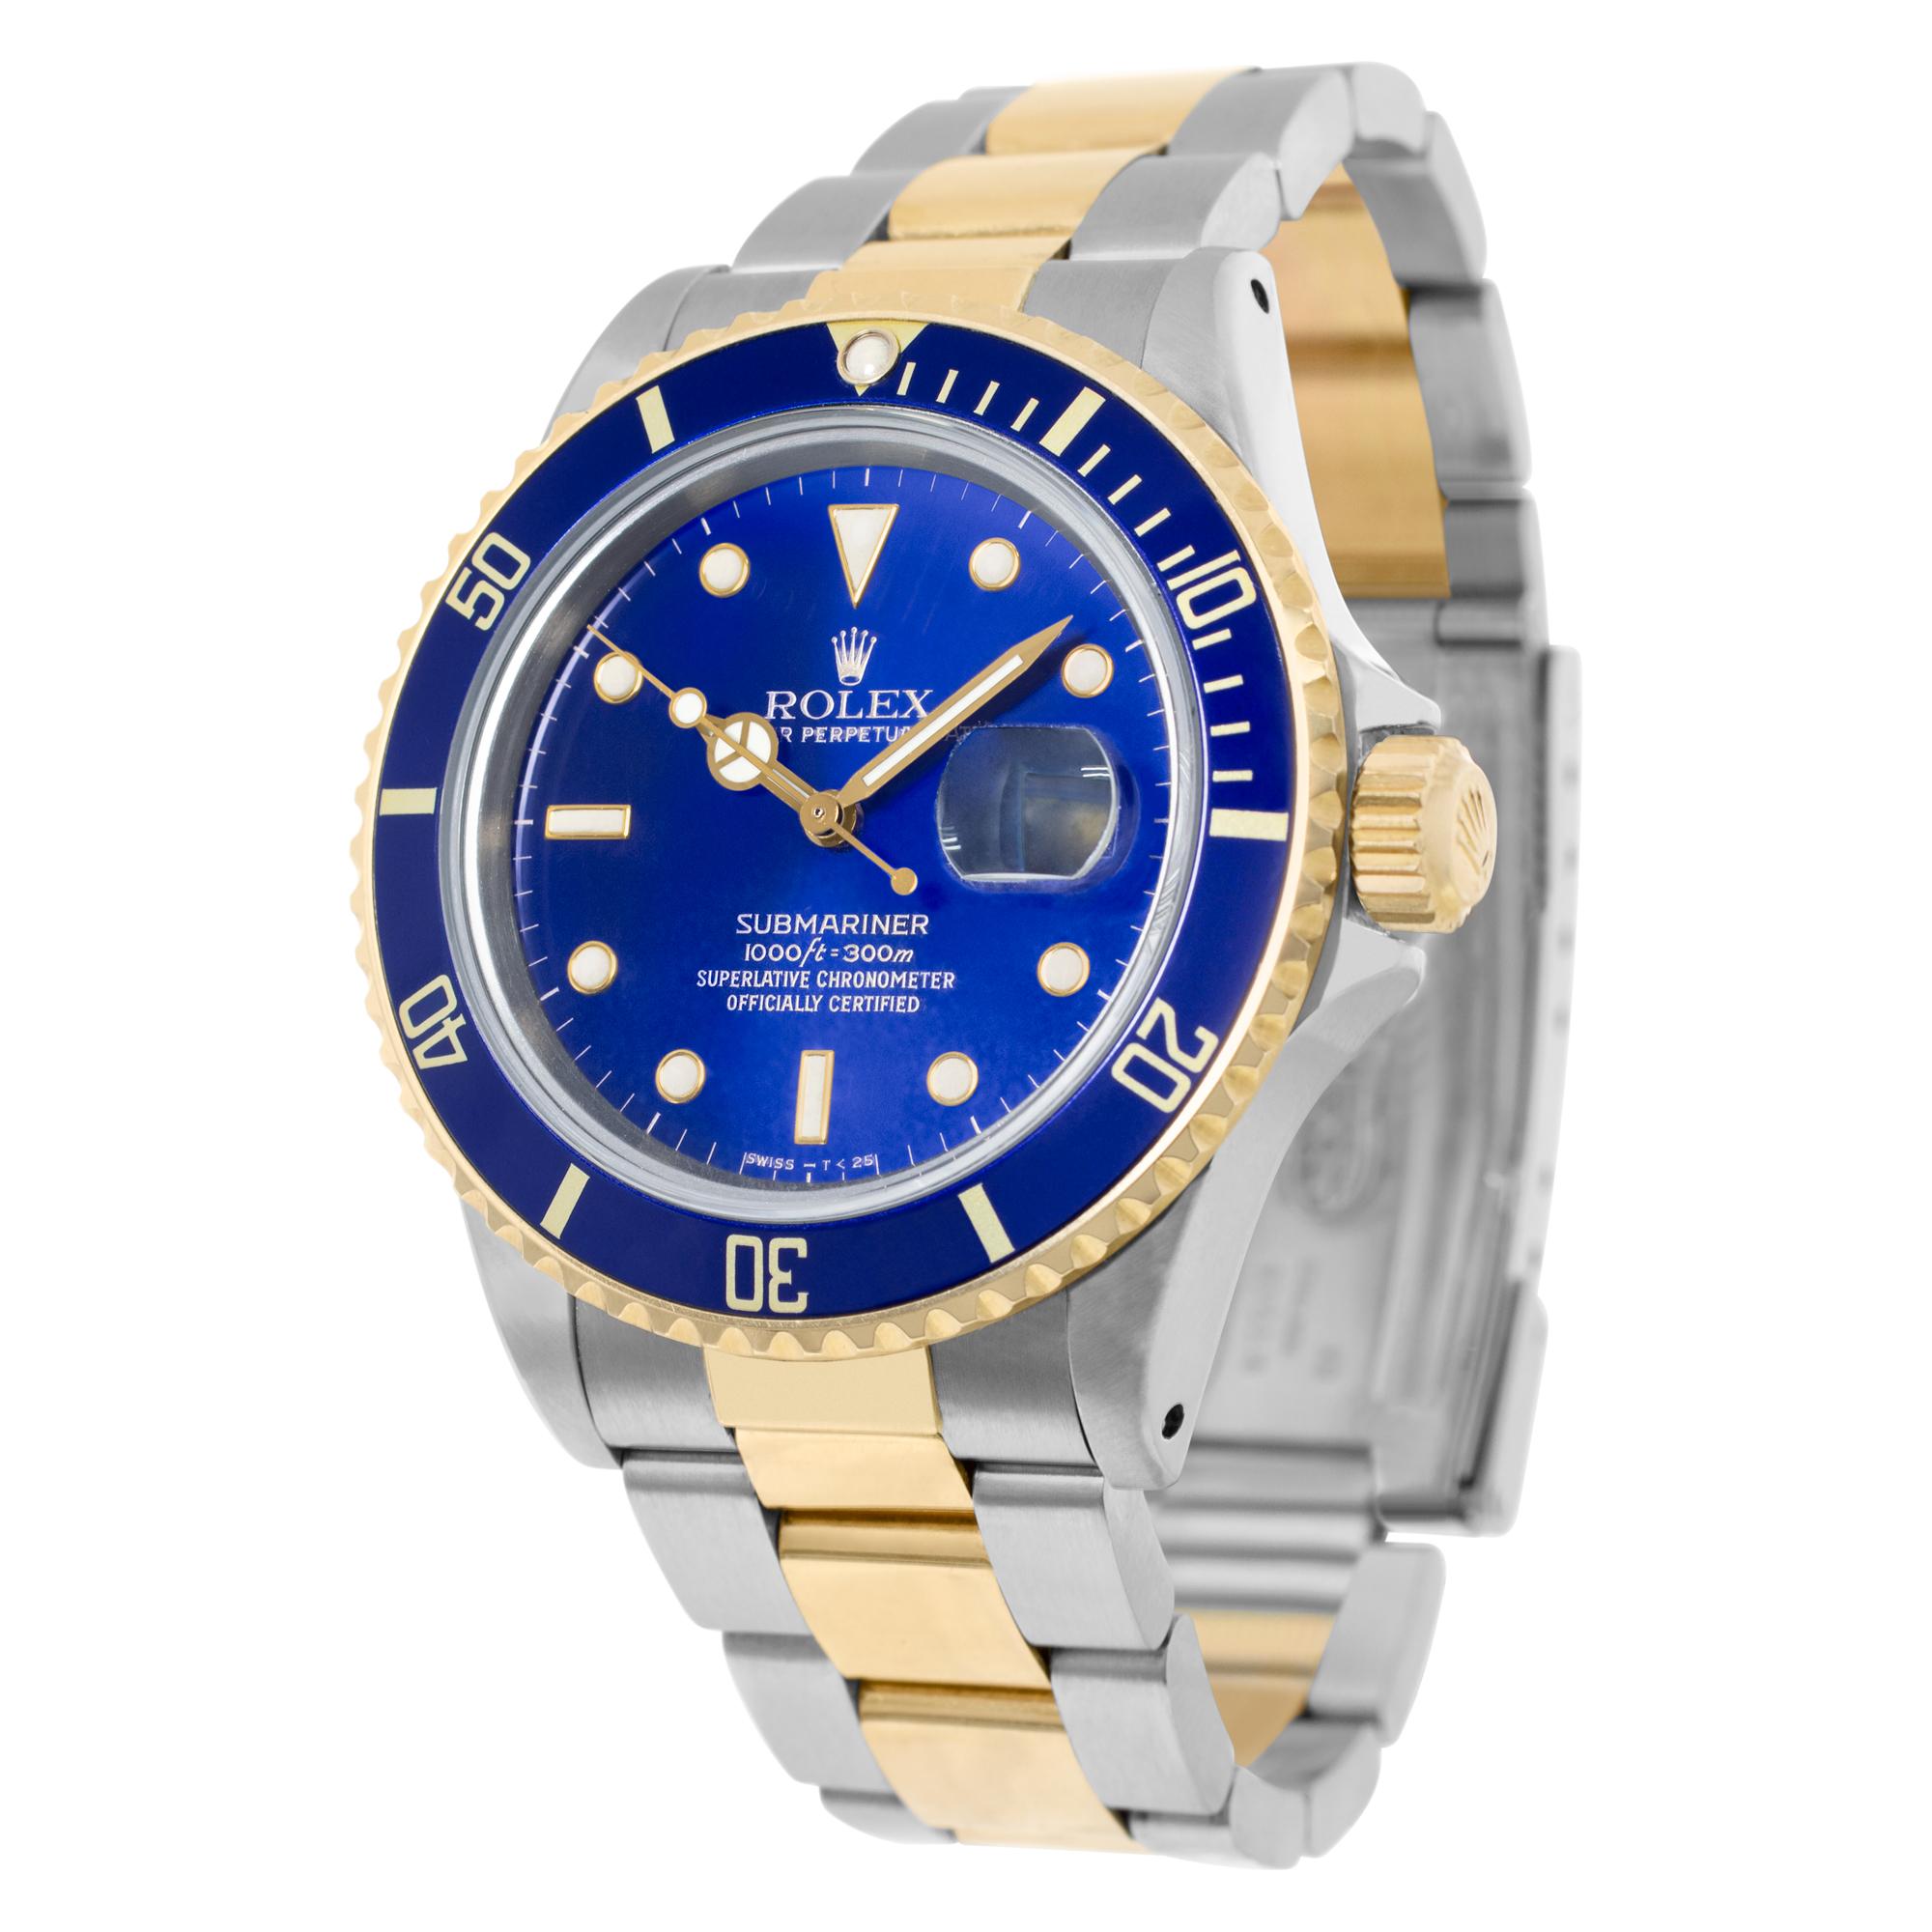 Rolex Submariner in 18k & stainless steel. Auto w/ sweep seconds and date. 40 mm case size. **Bank wire only at this price** Ref 16803. Circa 1987. Fine Pre-owned Rolex Watch.

Certified preowned Sport Rolex Submariner 16803 watch is made out of